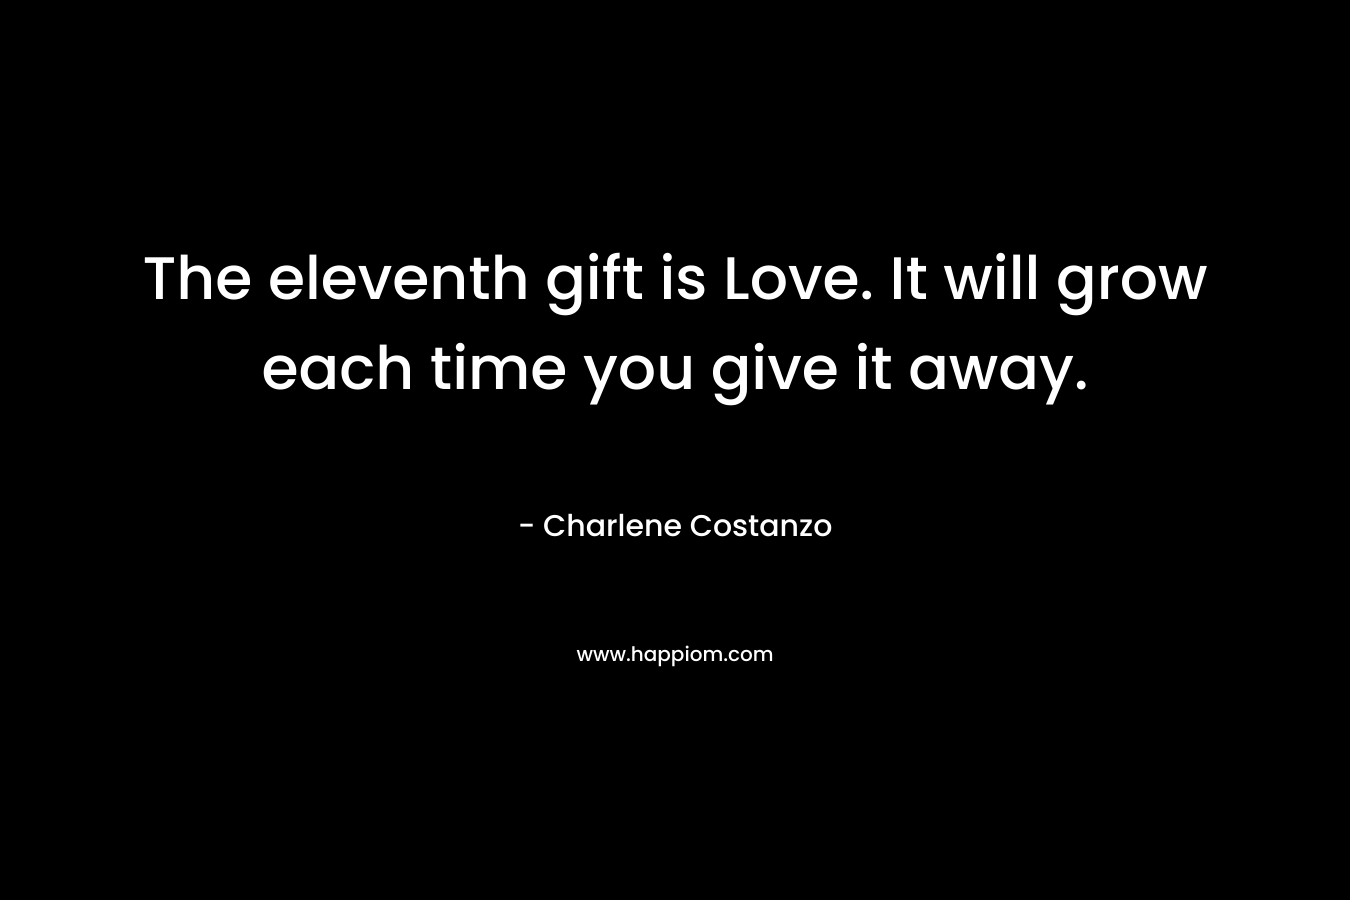 The eleventh gift is Love. It will grow each time you give it away.